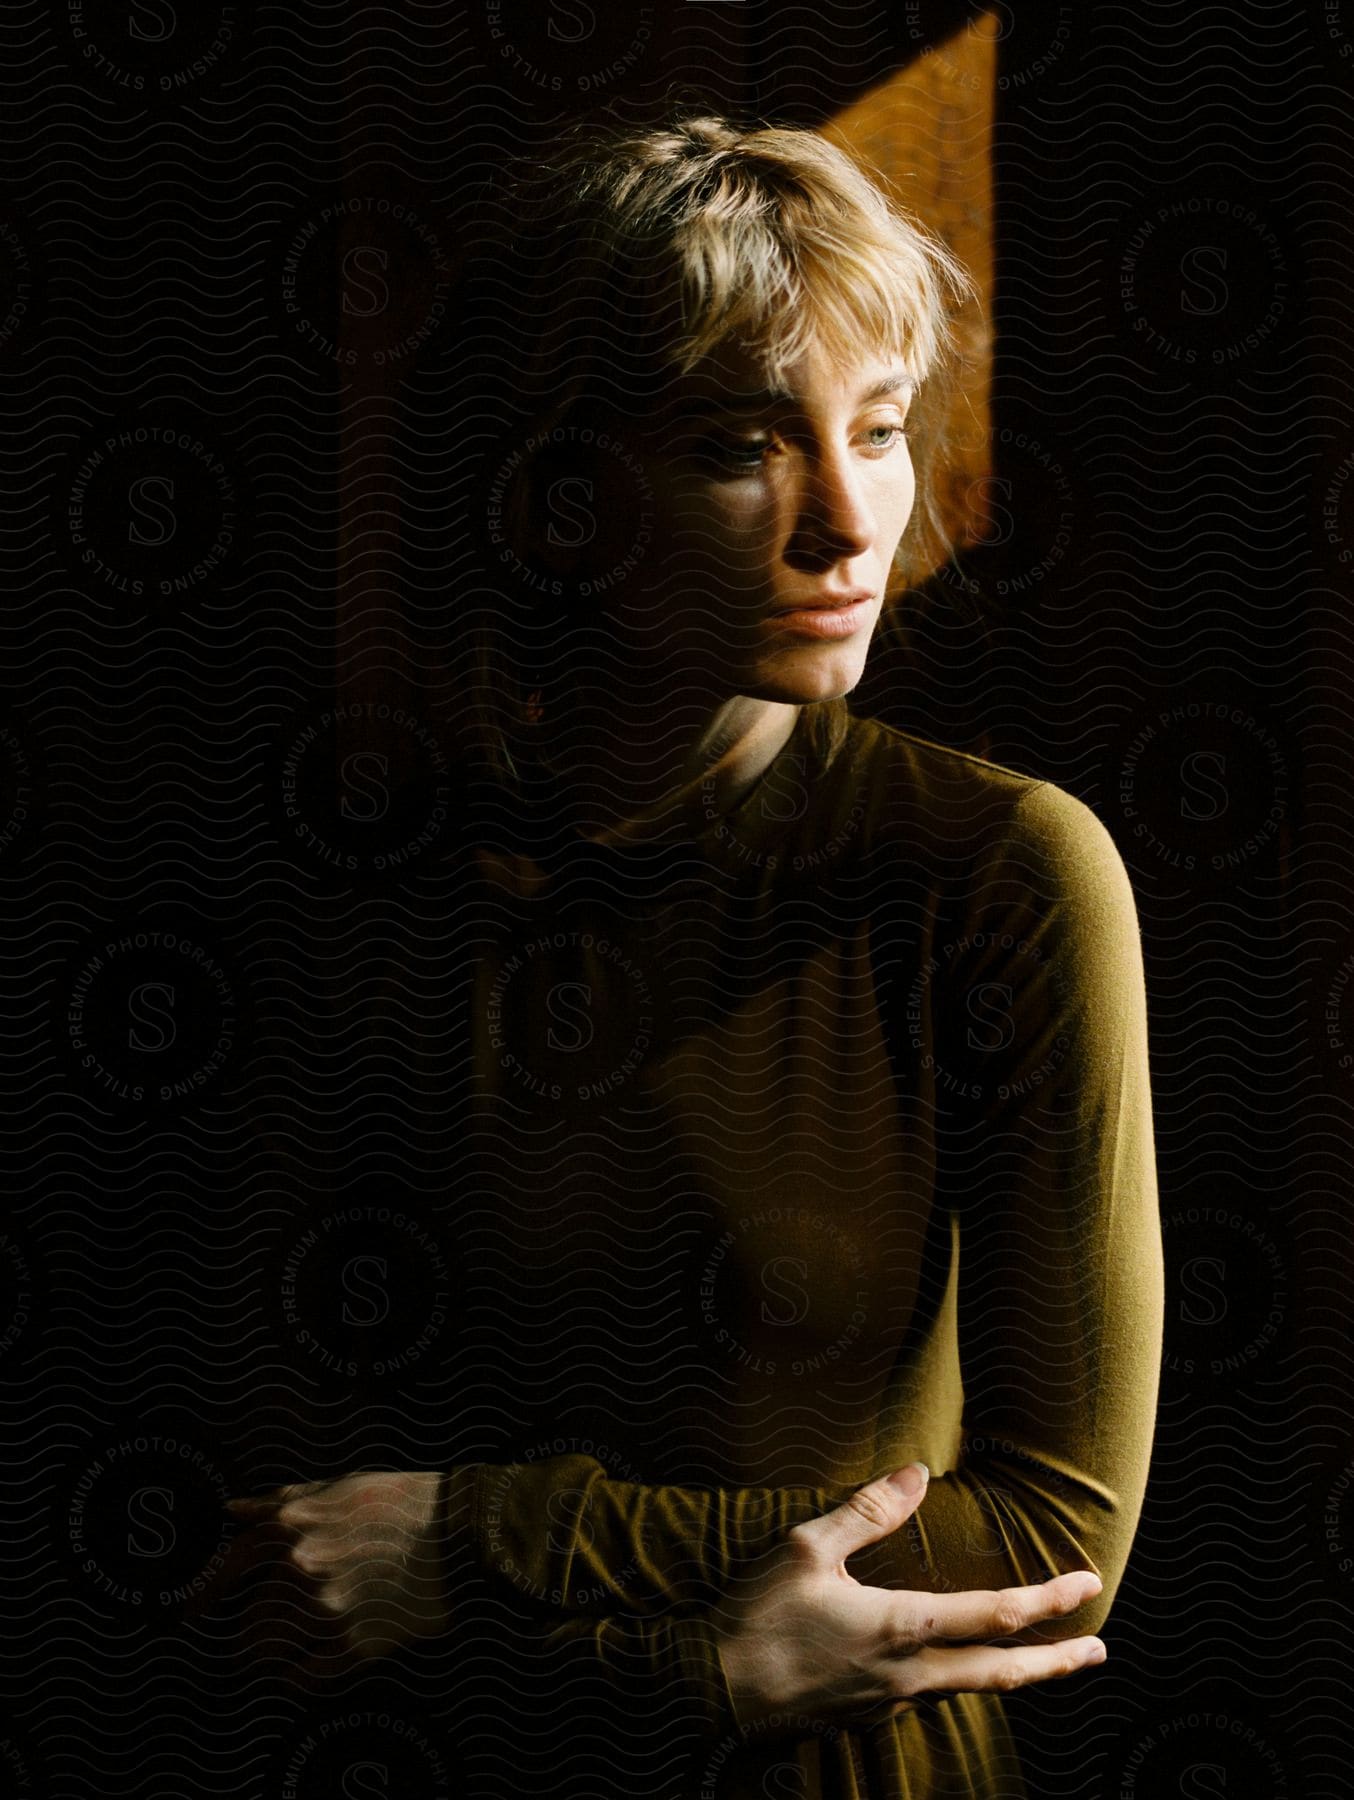 A portrait of a blonde lady with light shining on half of her face